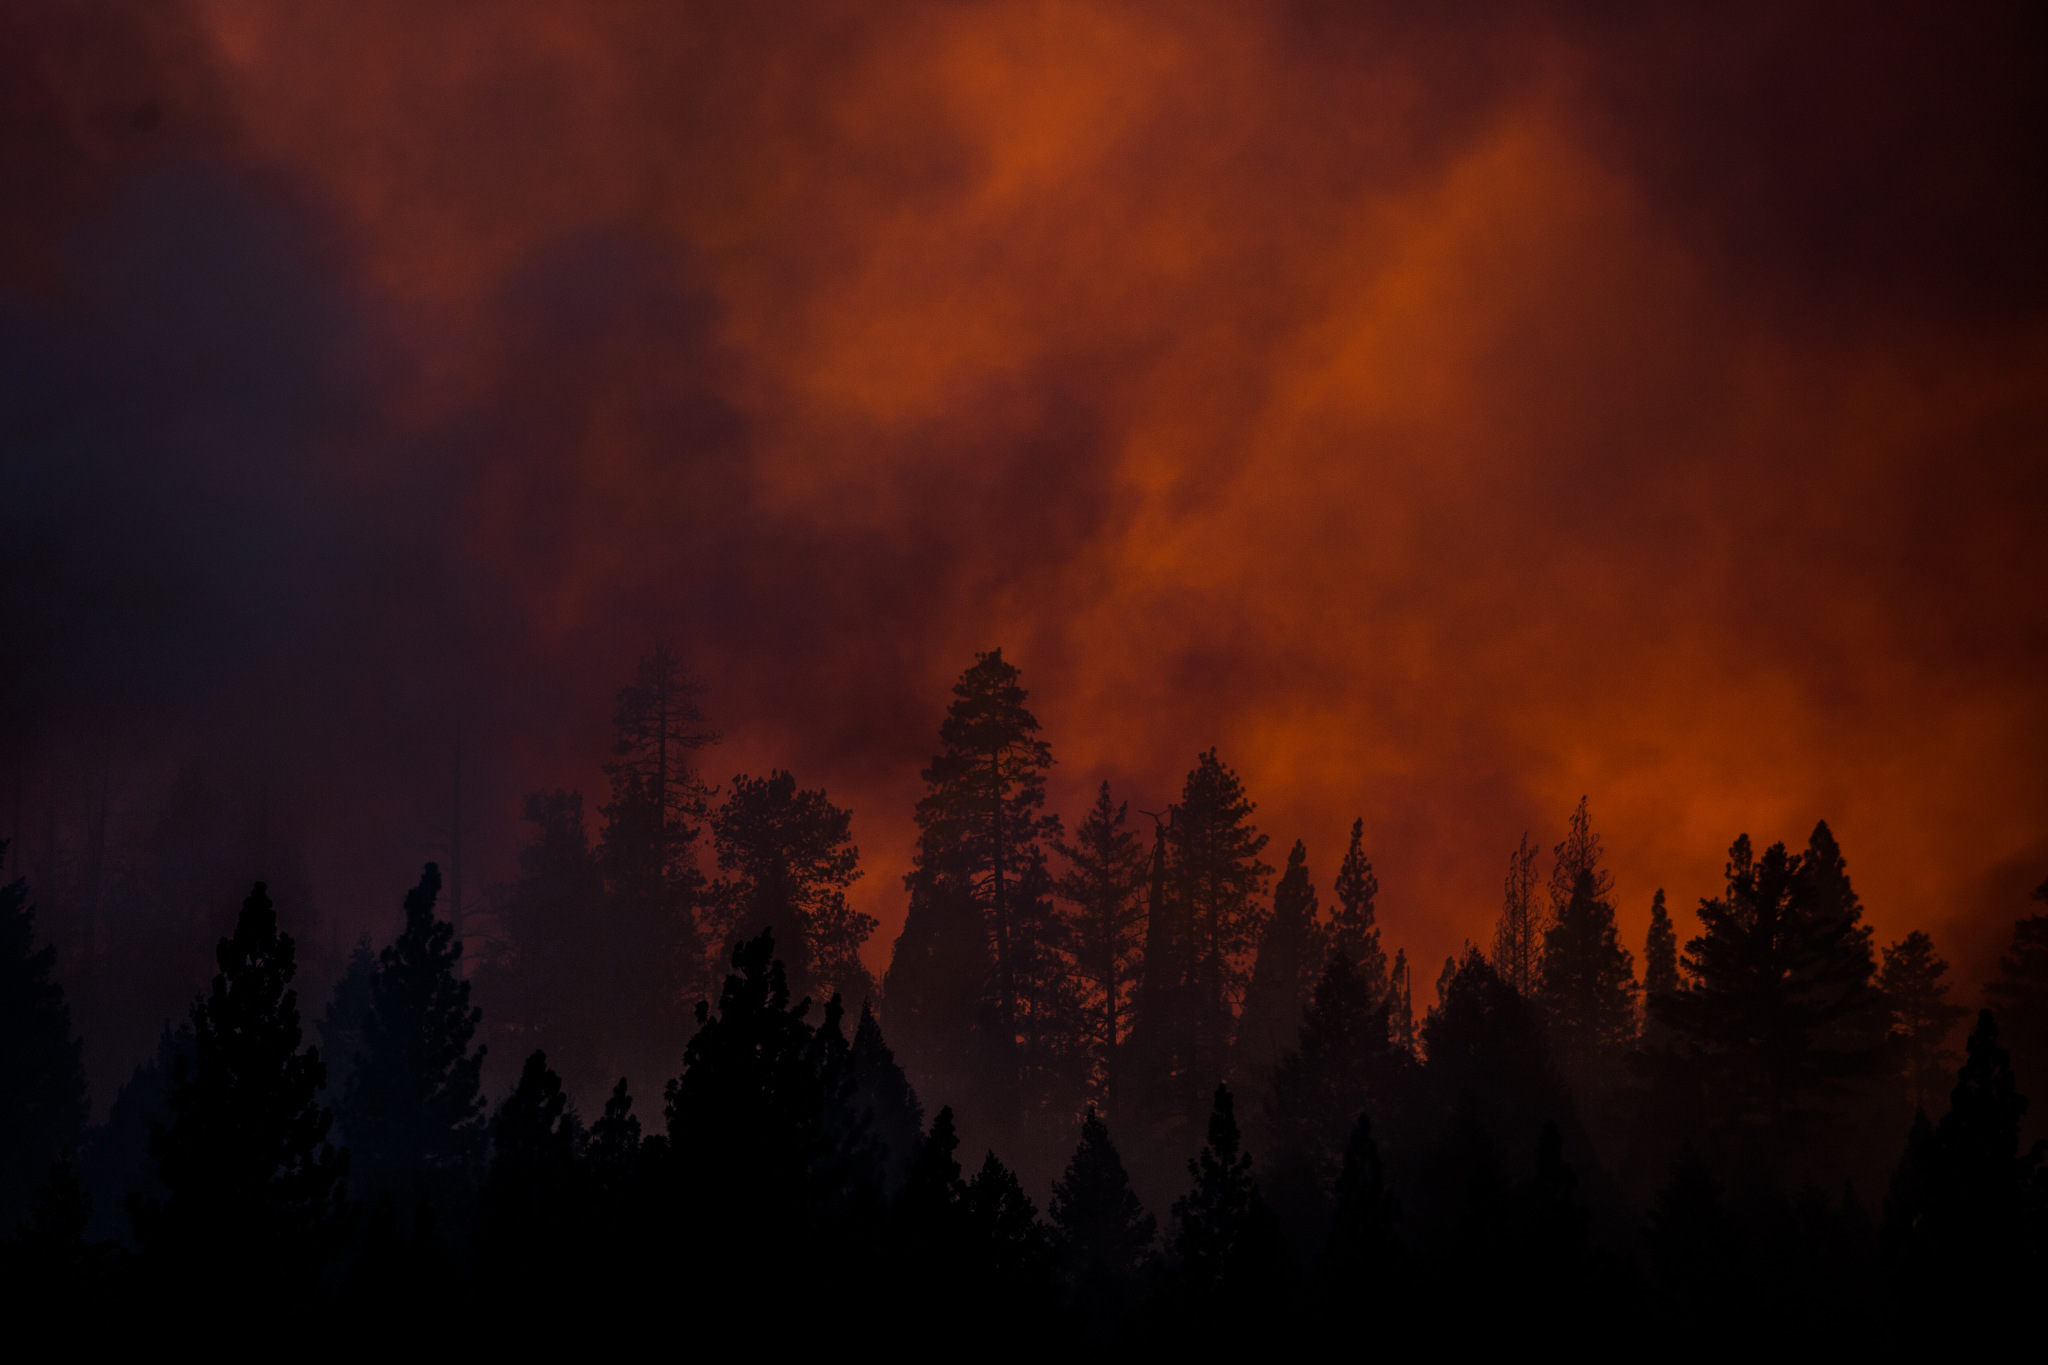  Sunset on the Rim Fire near Buck Meadows, California, August 22, 2013. The Rim Fire burned 257,314 acres and is the third largest wildfire in California history. 